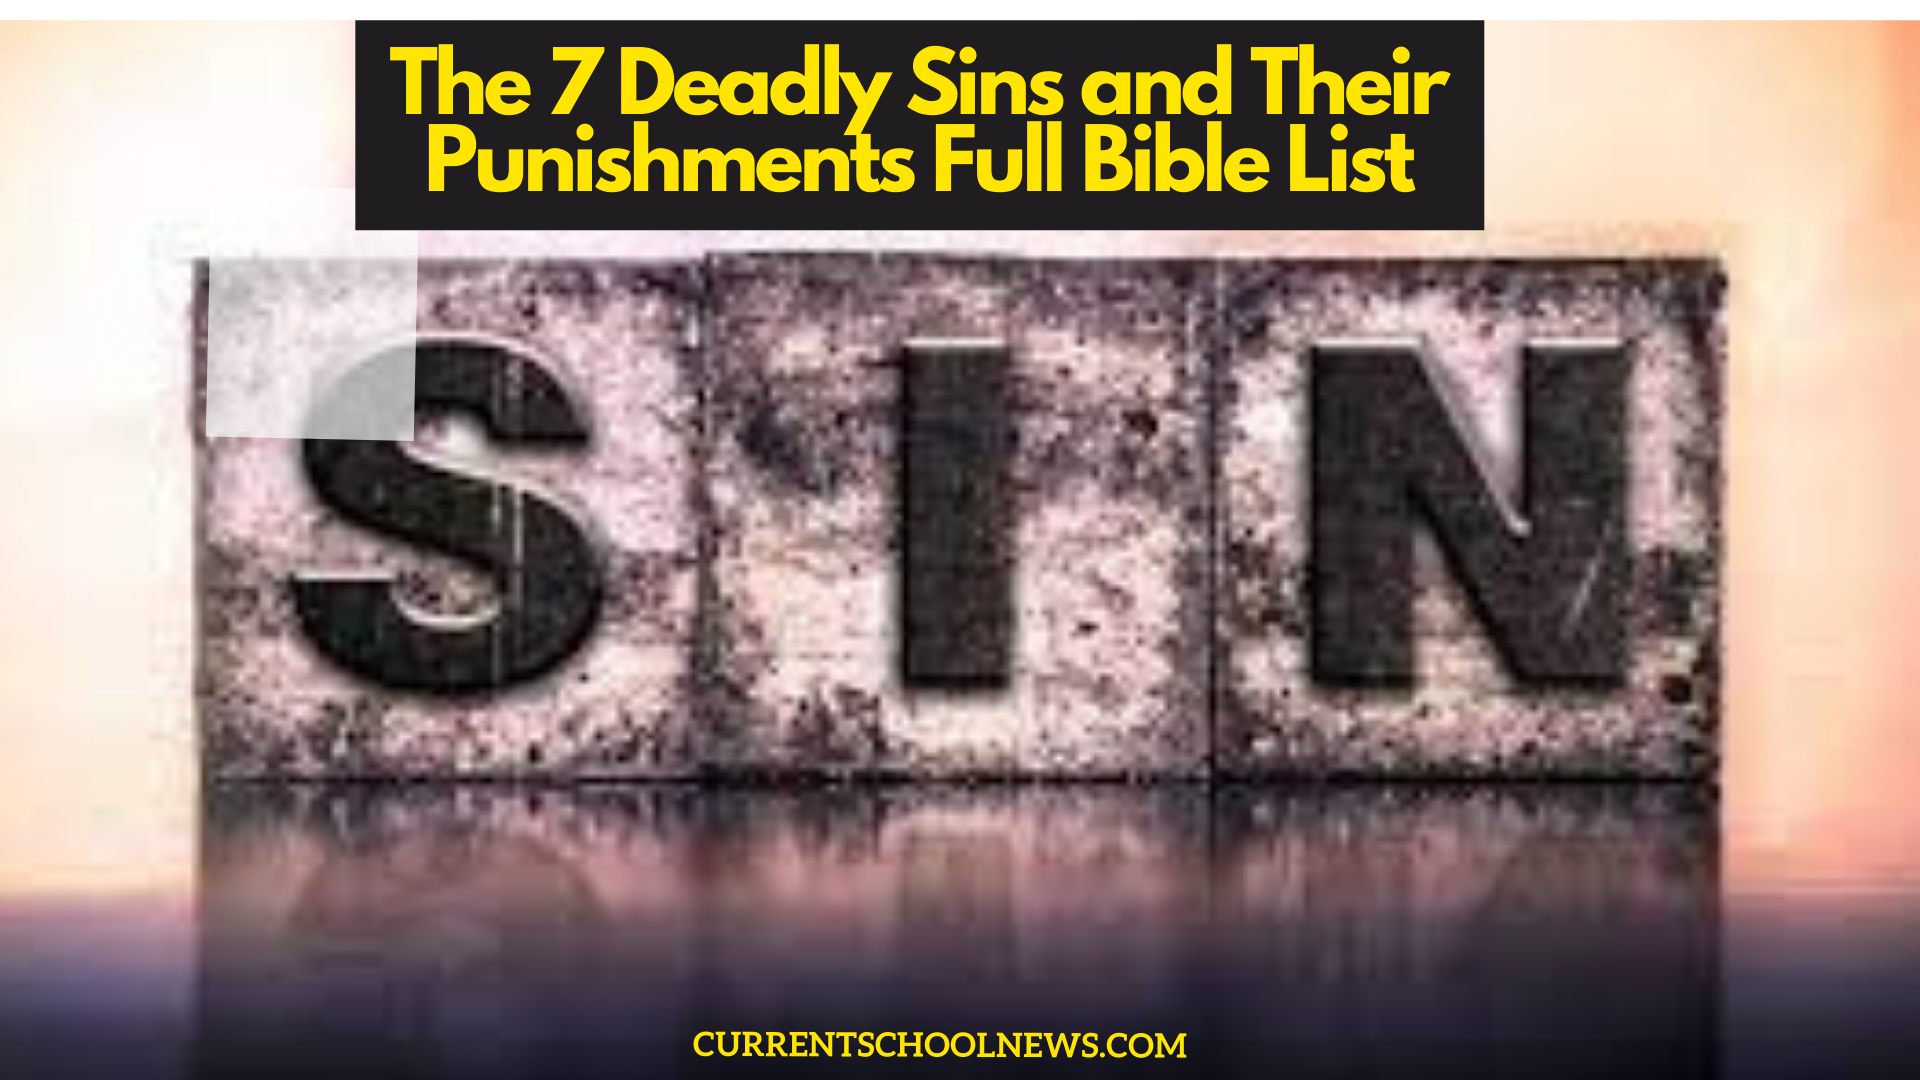 The 7 Deadly Sins and Their Punishments Full Bible List